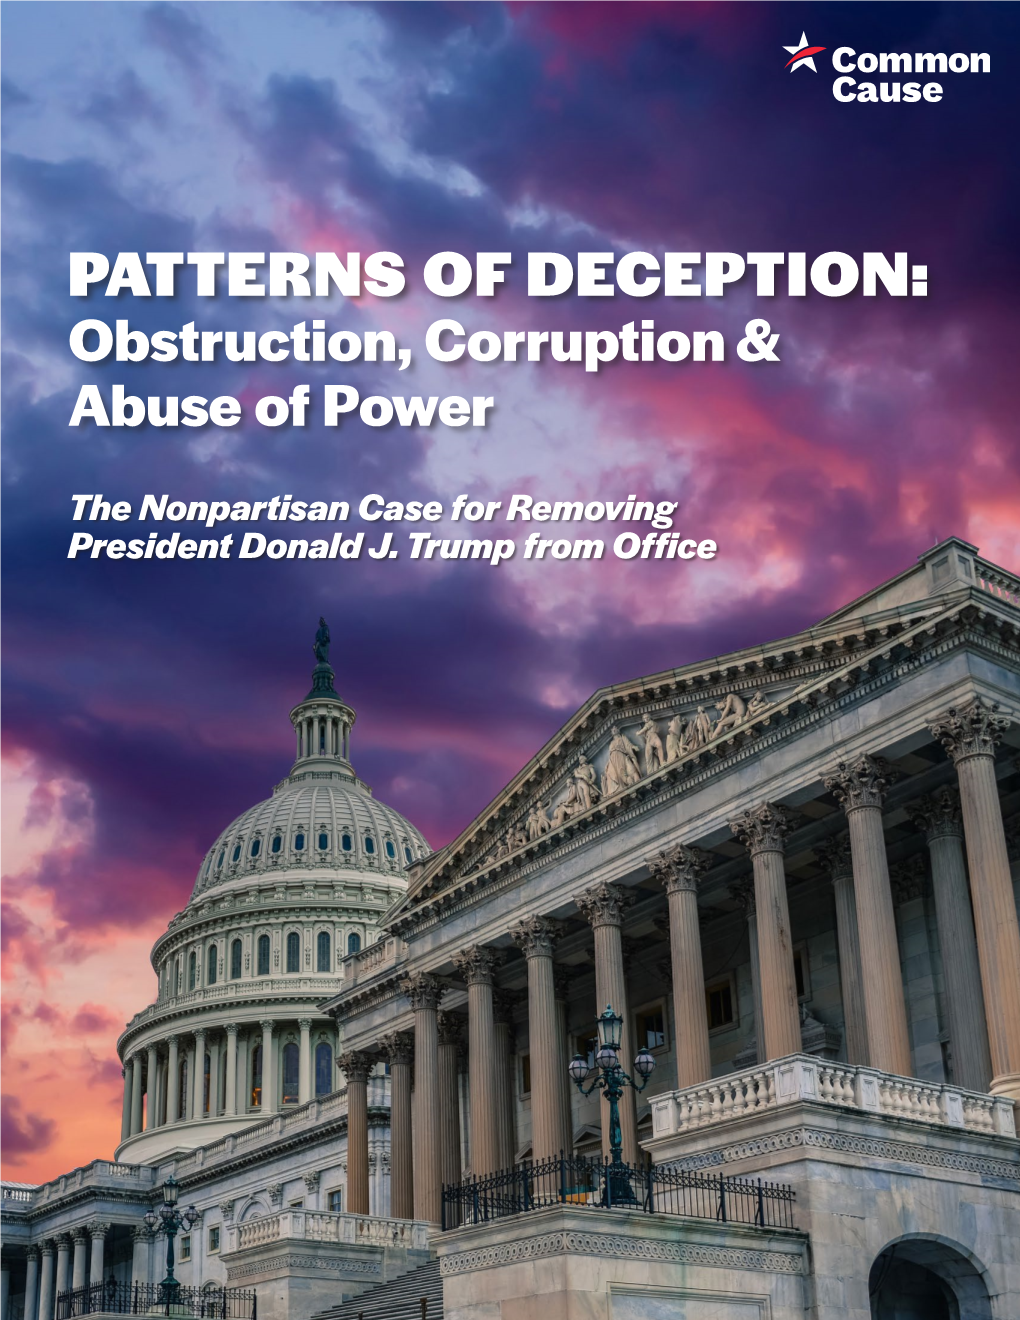 PATTERNS of DECEPTION: Obstruction, Corruption & Abuse of Power